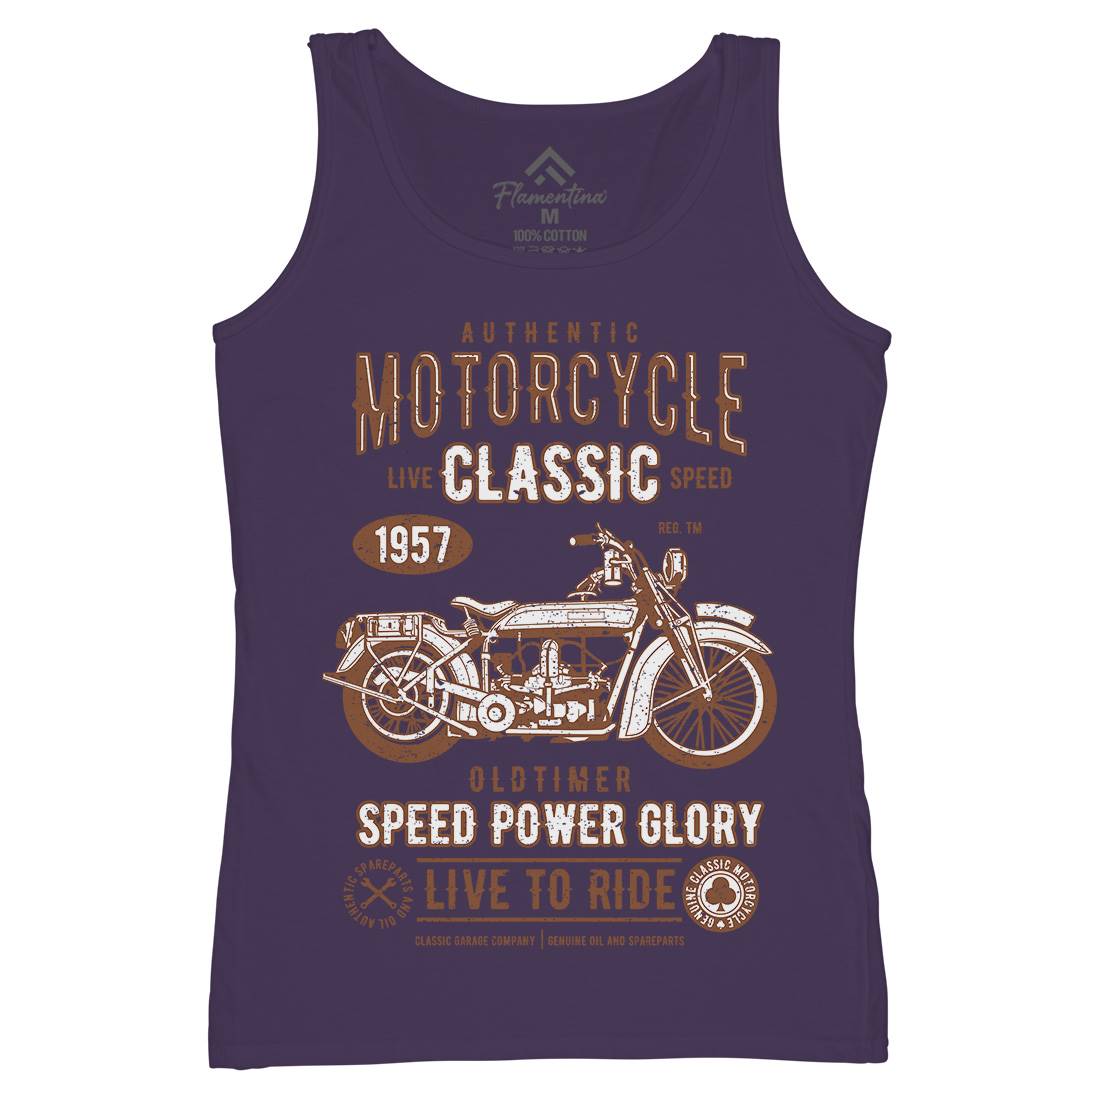 Classic Womens Organic Tank Top Vest Motorcycles A719